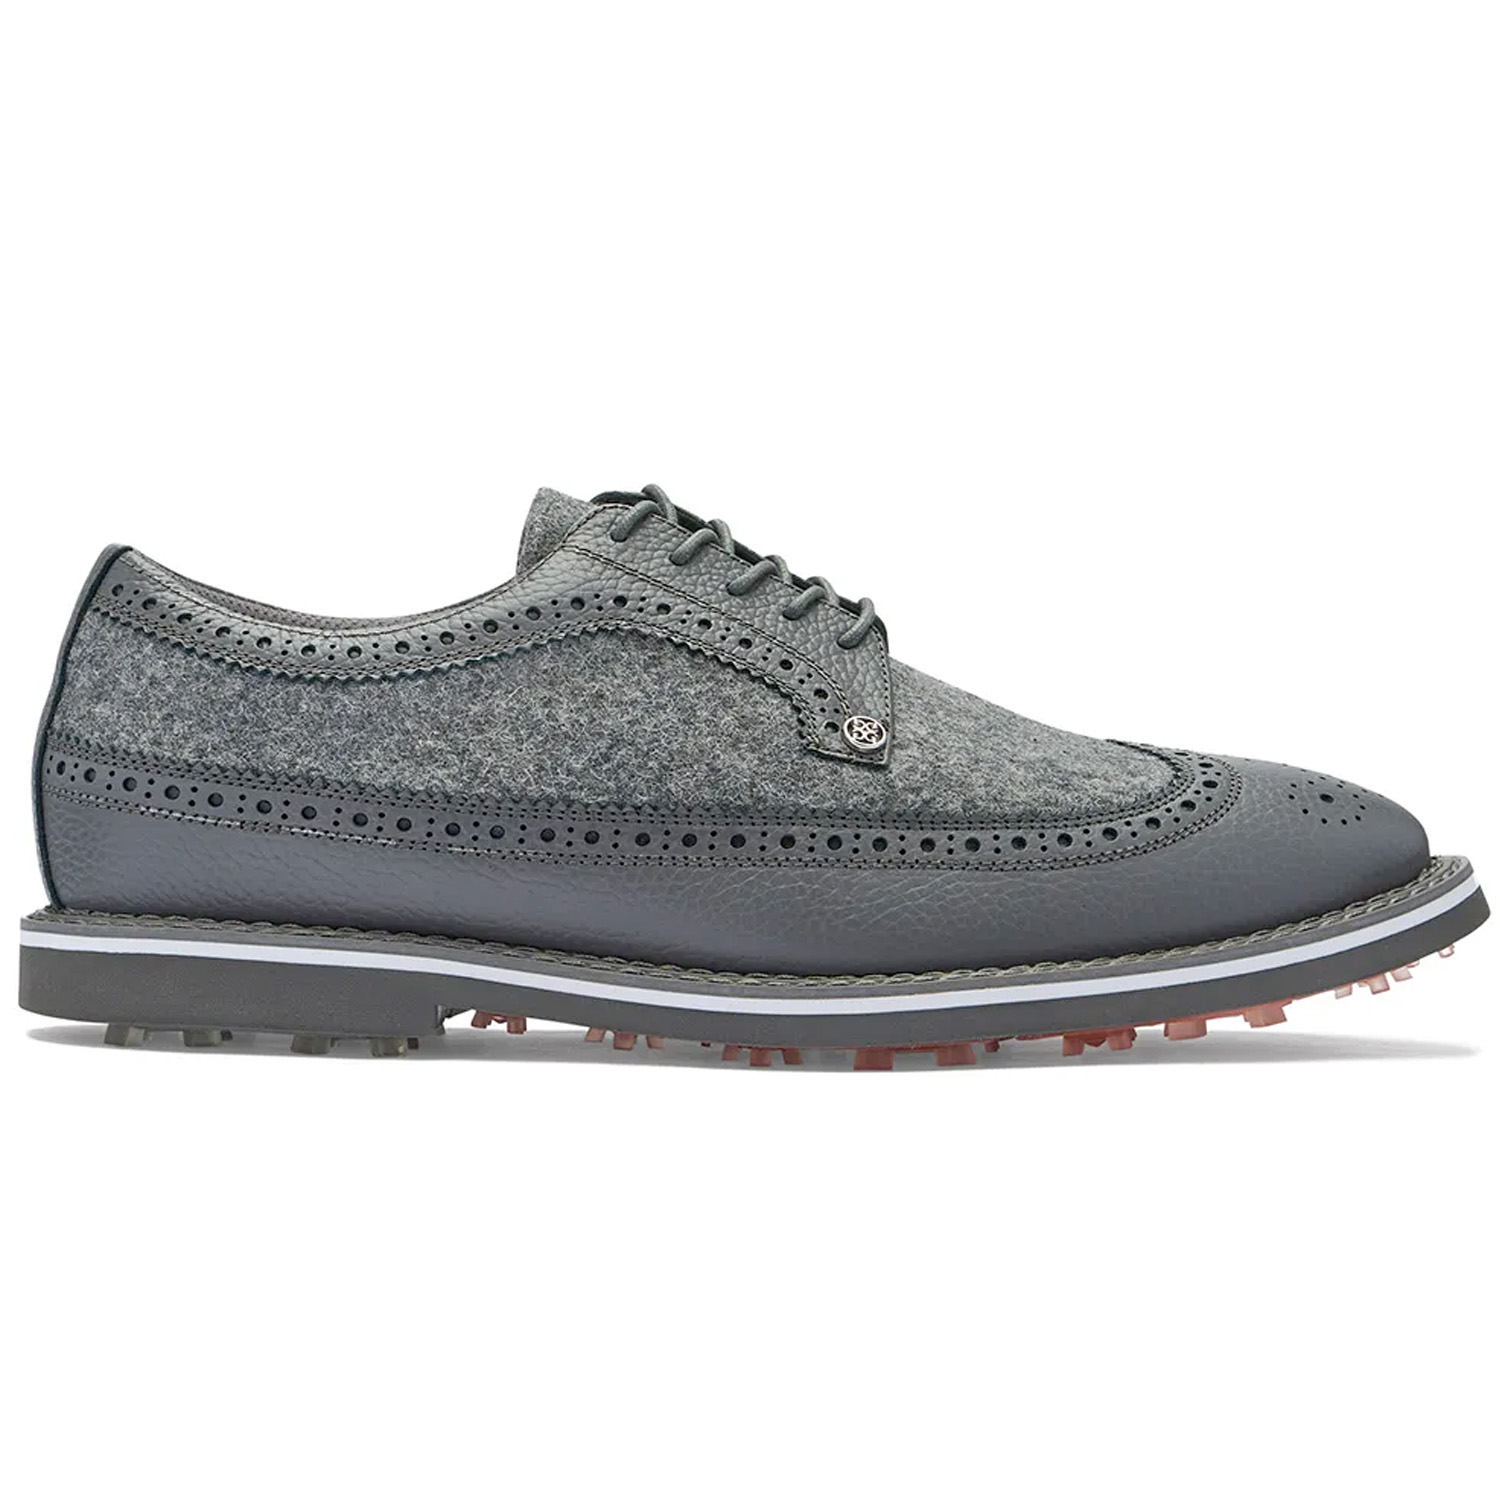 G/FORE Long Wing Gallivanter Golf Shoes